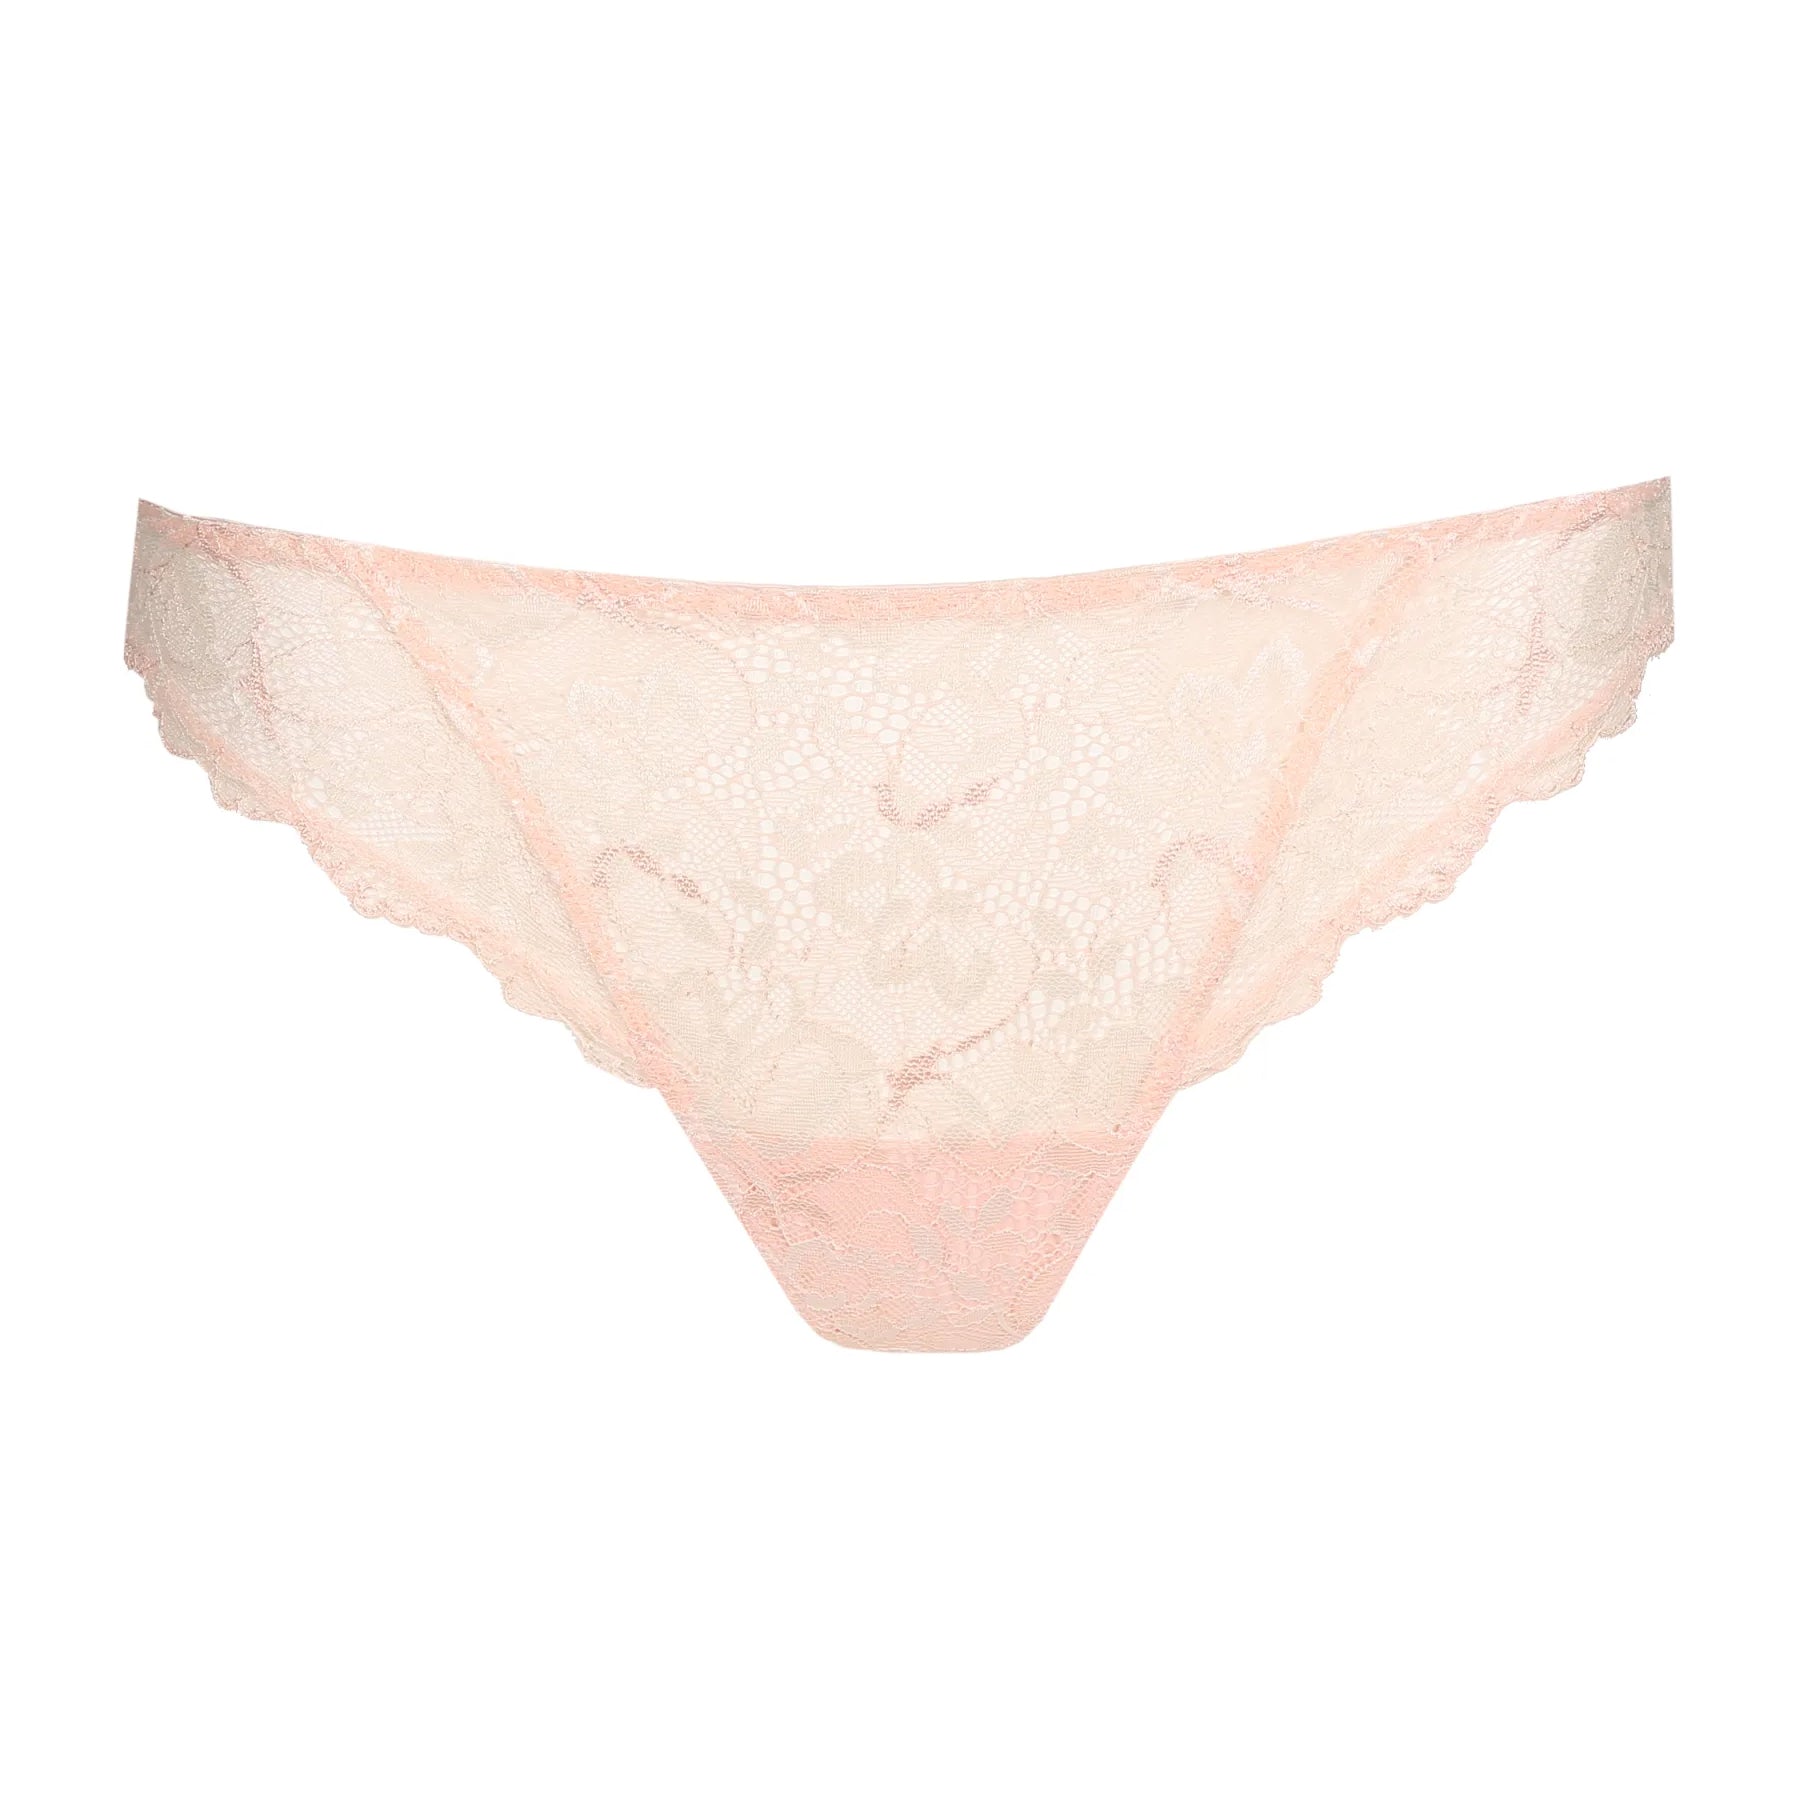 Handmade Thongs in White Color With Lace, Lace Has White and White Flowers.  -  Canada